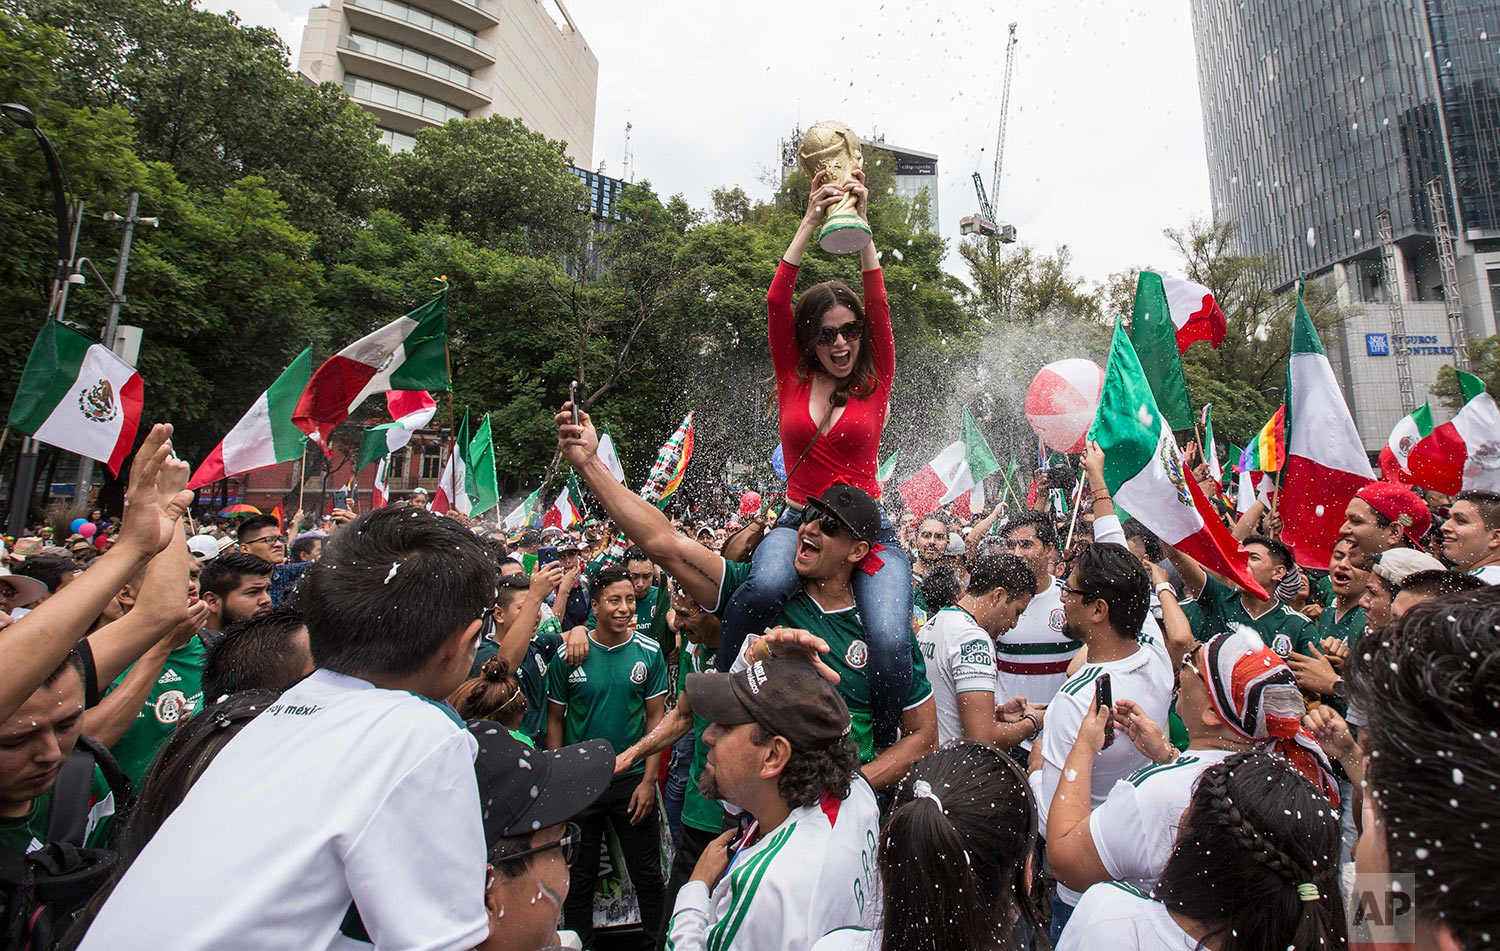  Soccer fans celebrate Mexico's World Cup game victory over Korea in Mexico City, June 23, 2018. (AP Photo/Christian Palma) 